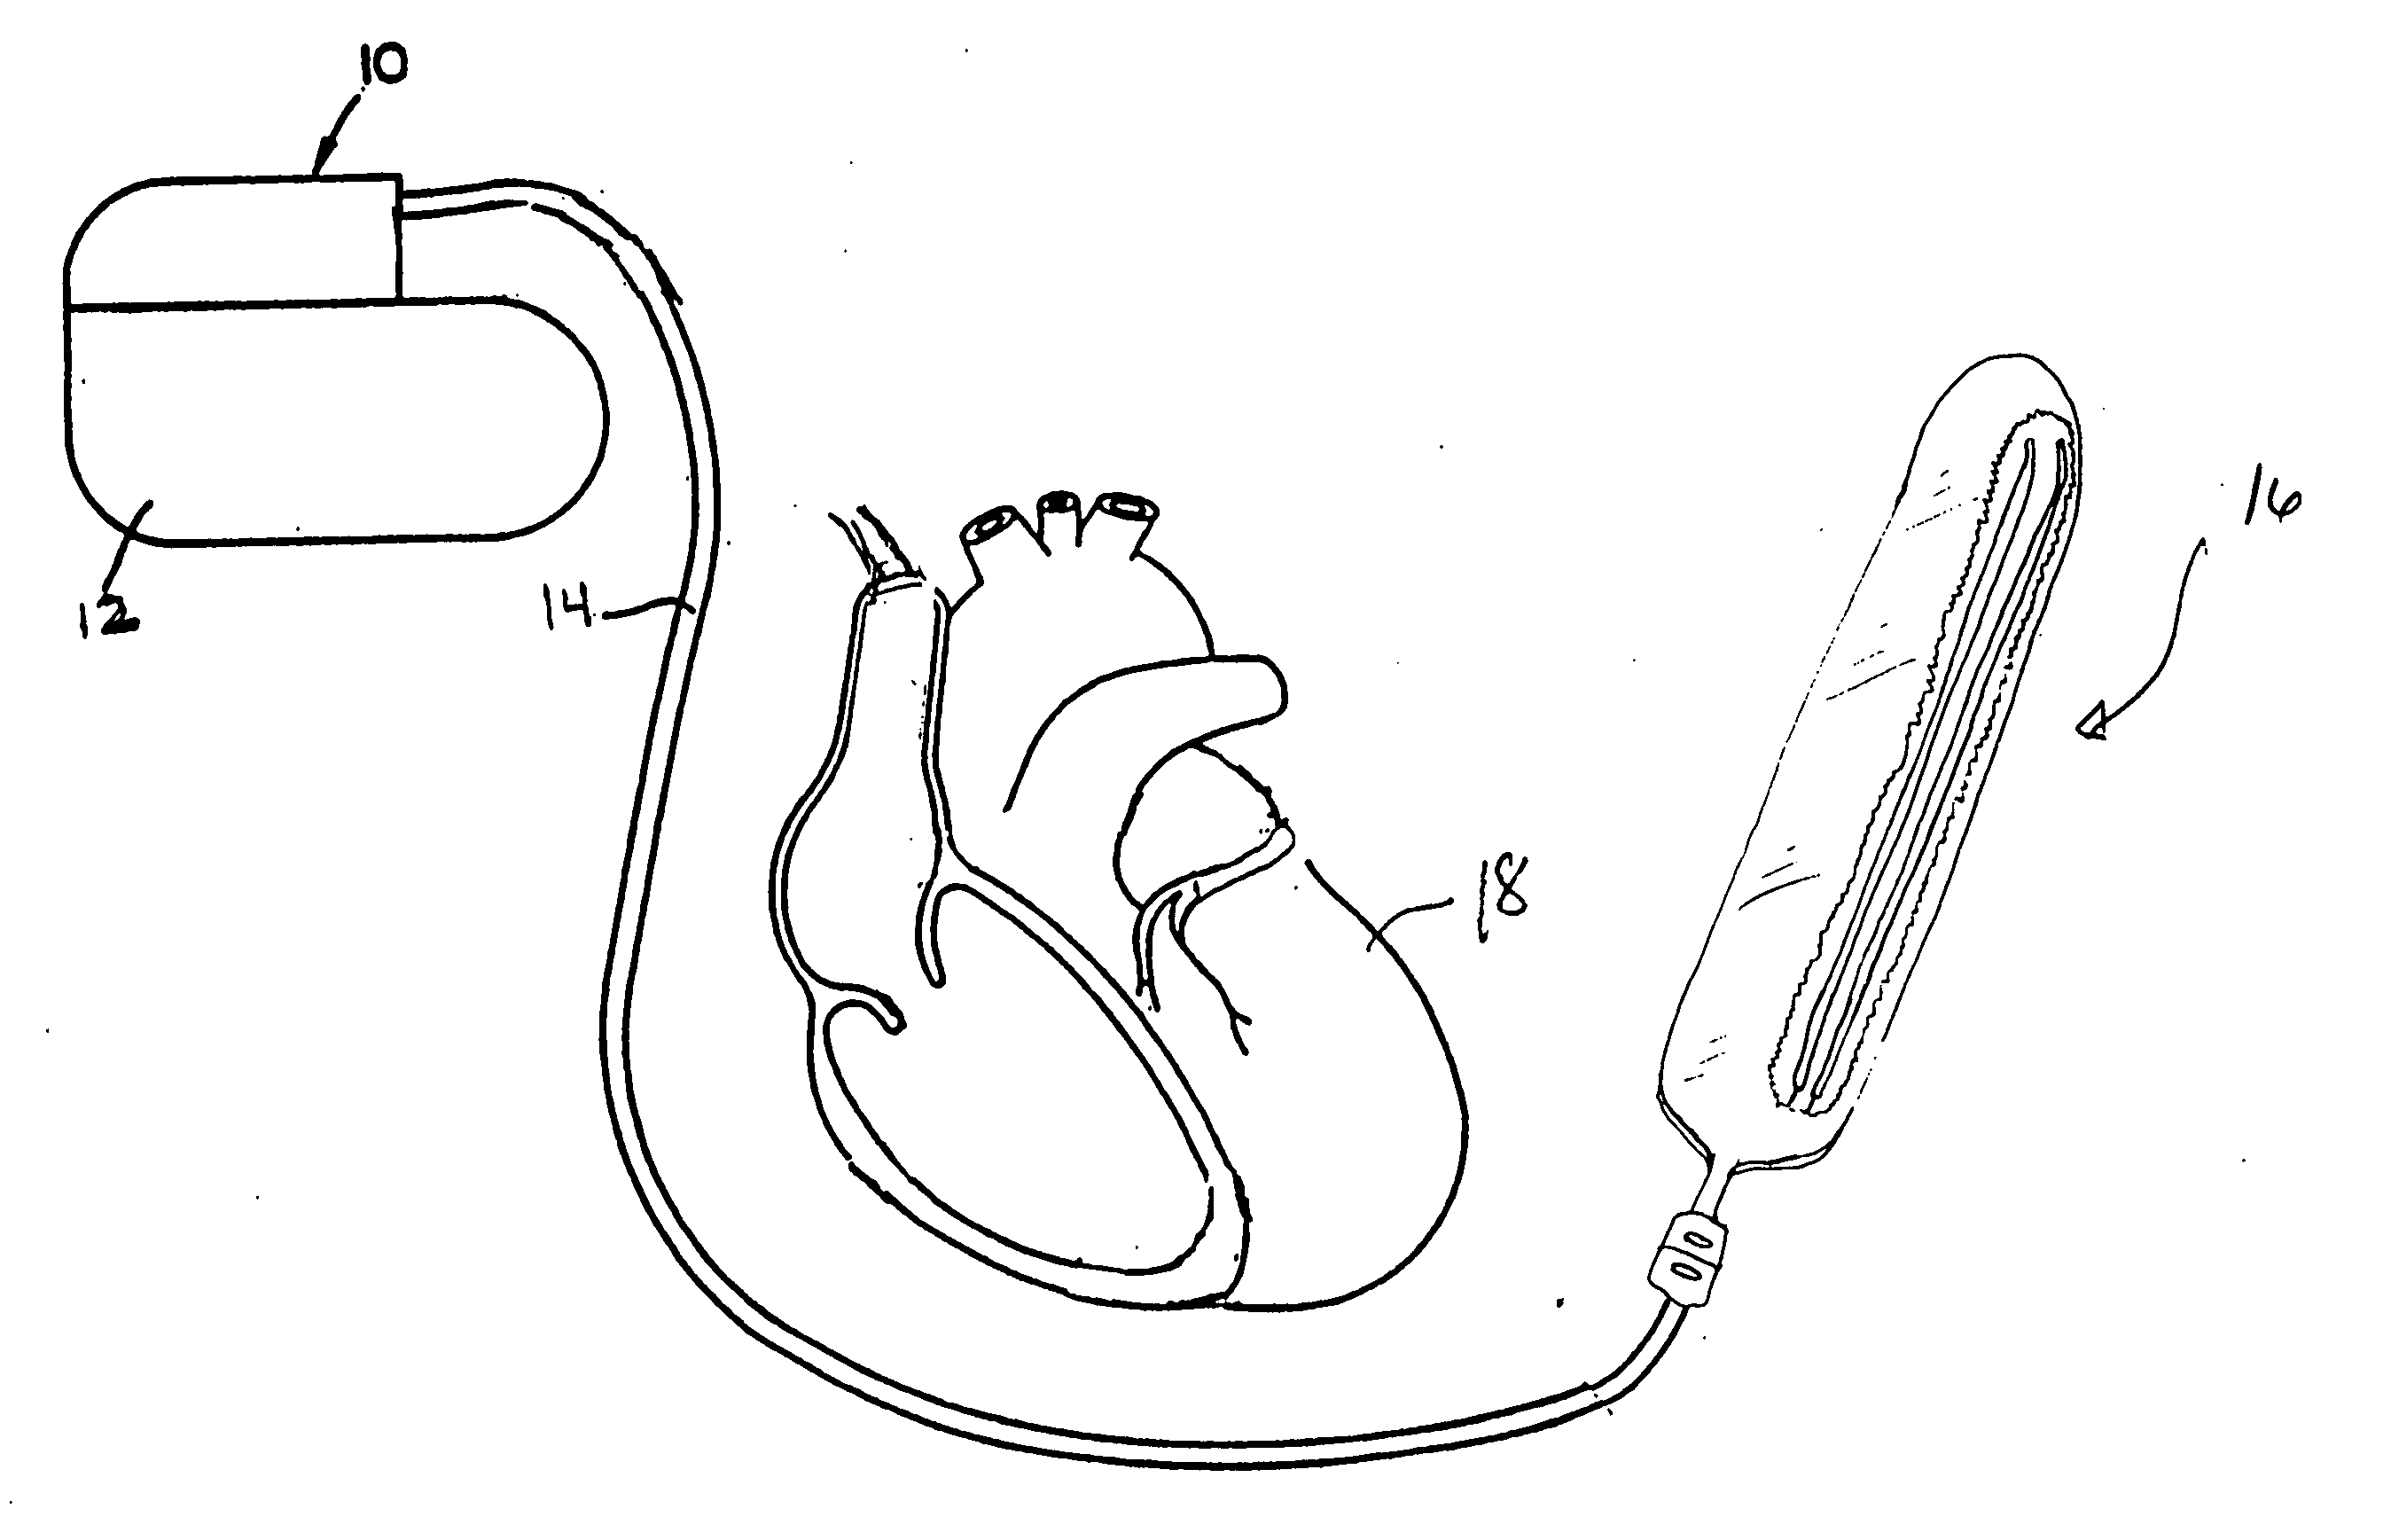 Subcutaneous lead system for detection and treatment of malignant ventricular arrhythmia